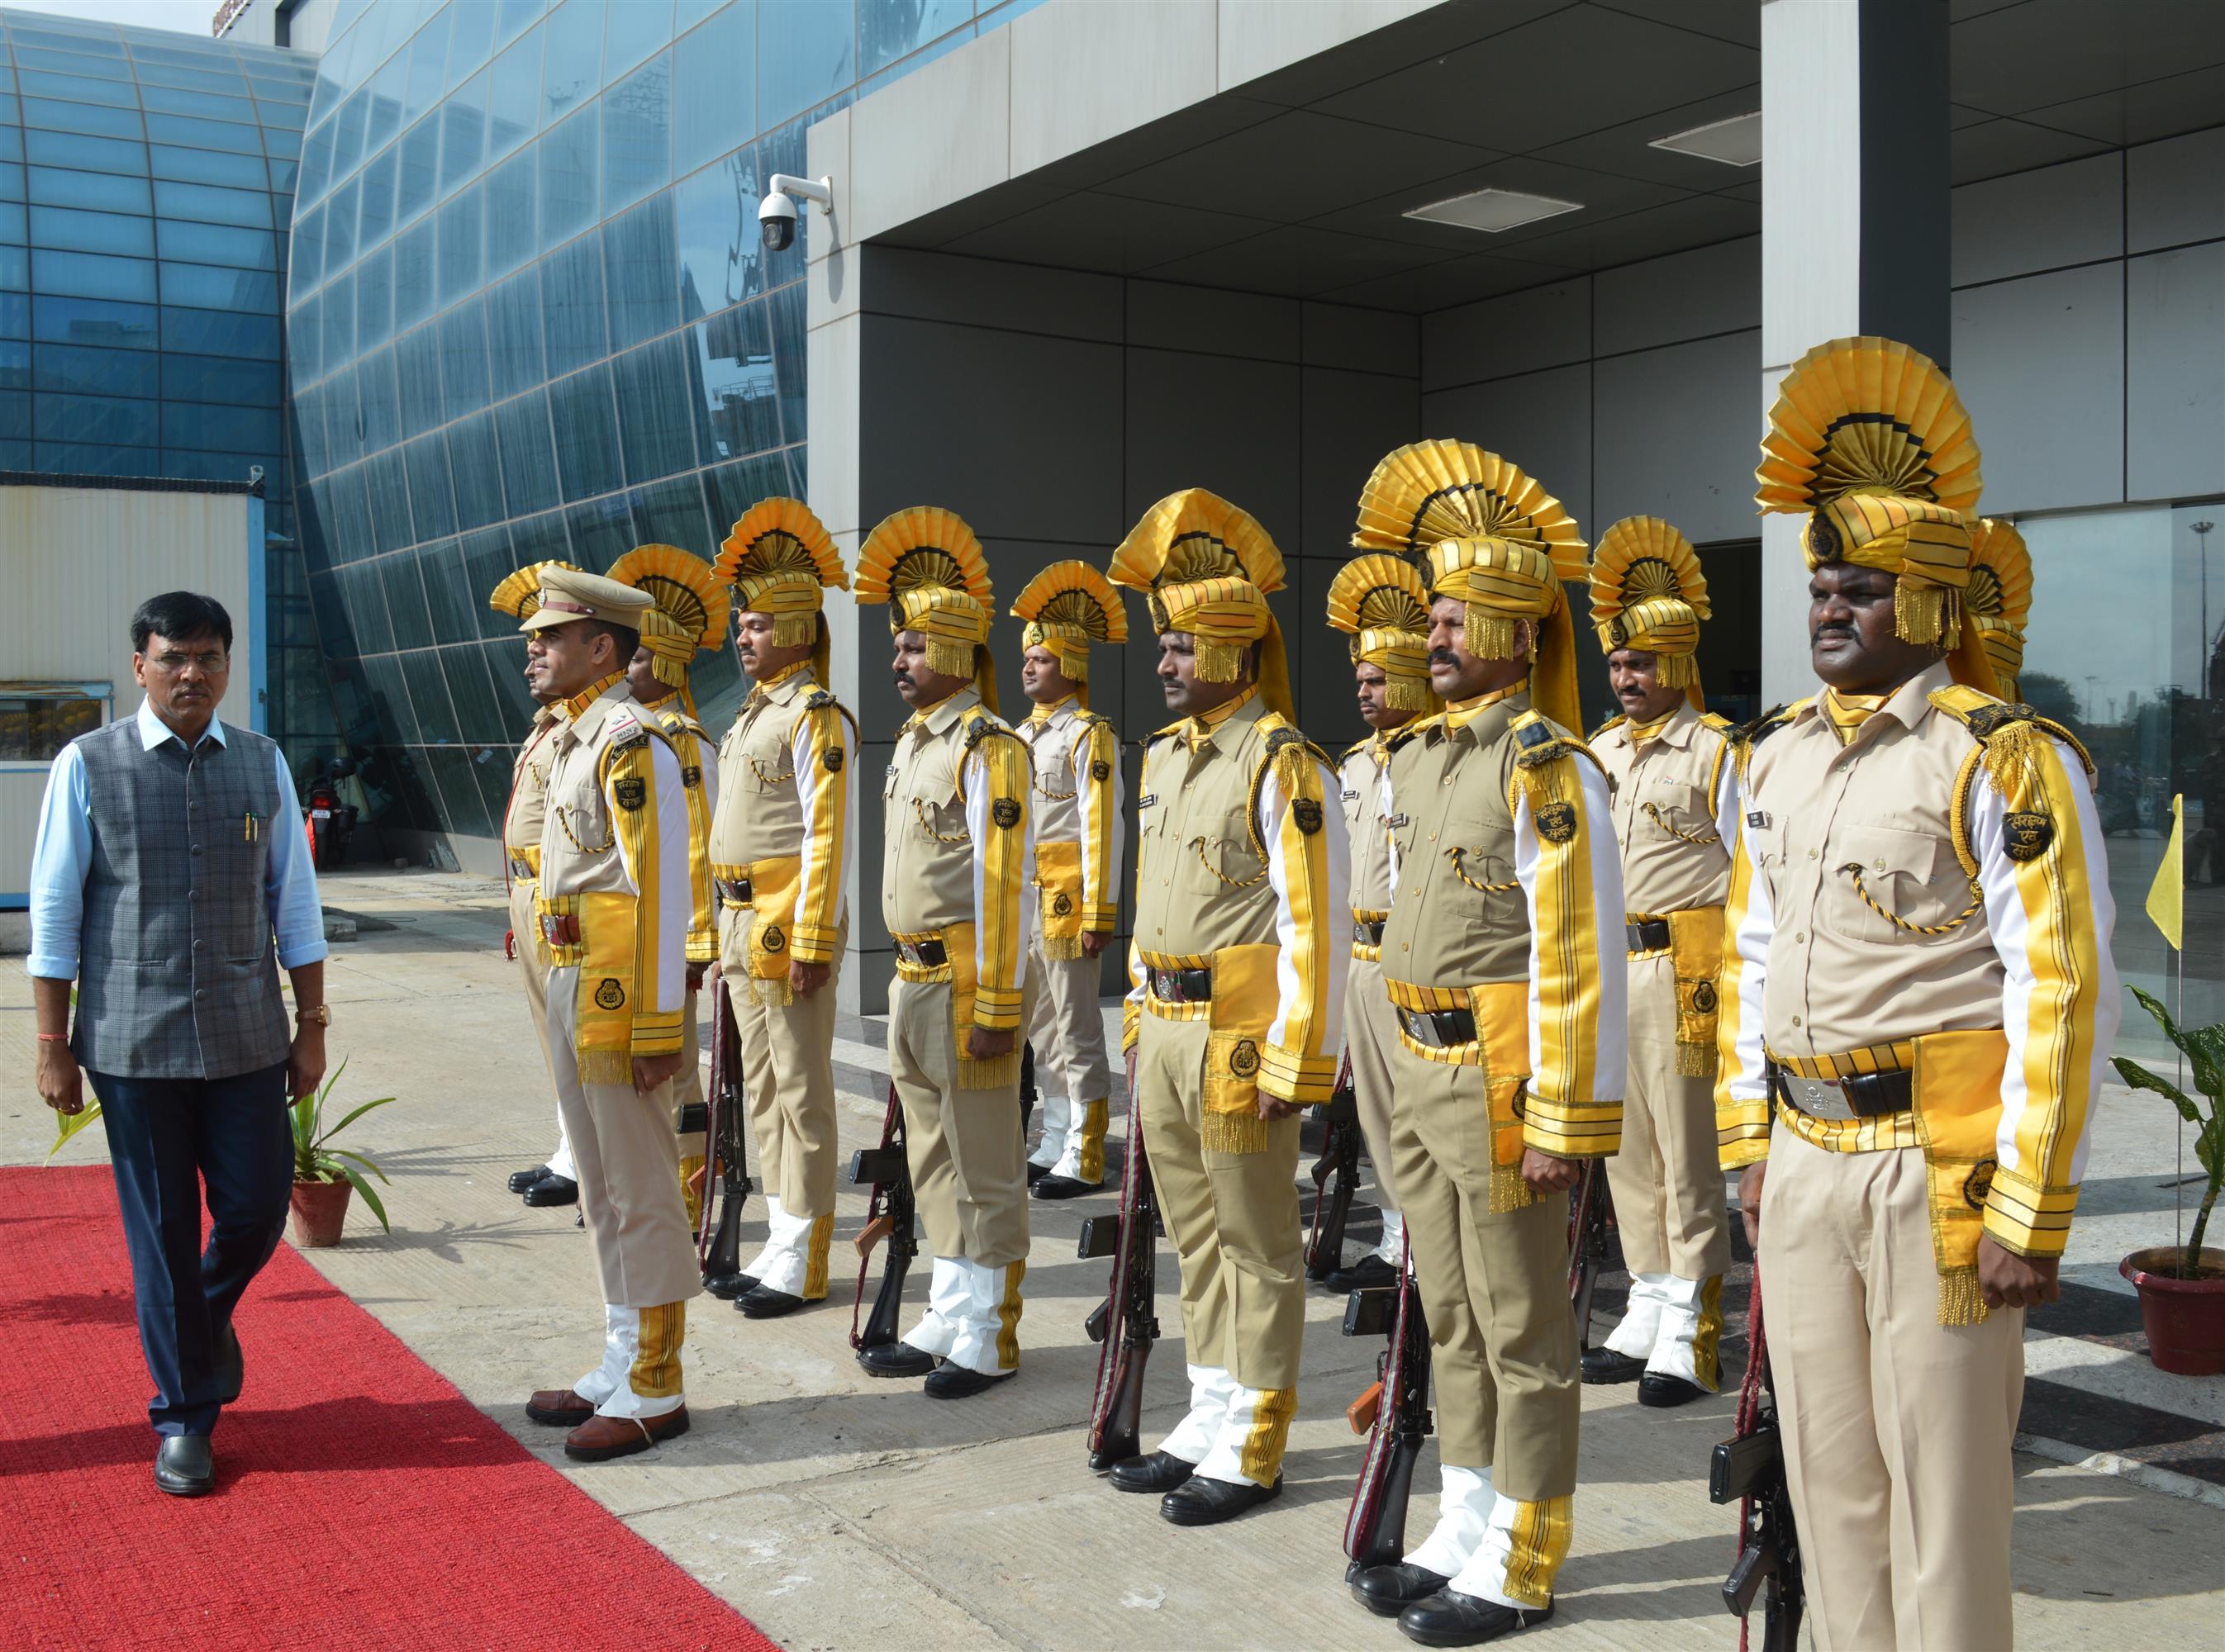 Union Minister of State for Shipping (Independent Charge) and Chemicals & Fertilizers Shri Mansukh Mandaviya is inspecting the Guard of Honour at the Chennai Port Trust today (14.11.19)